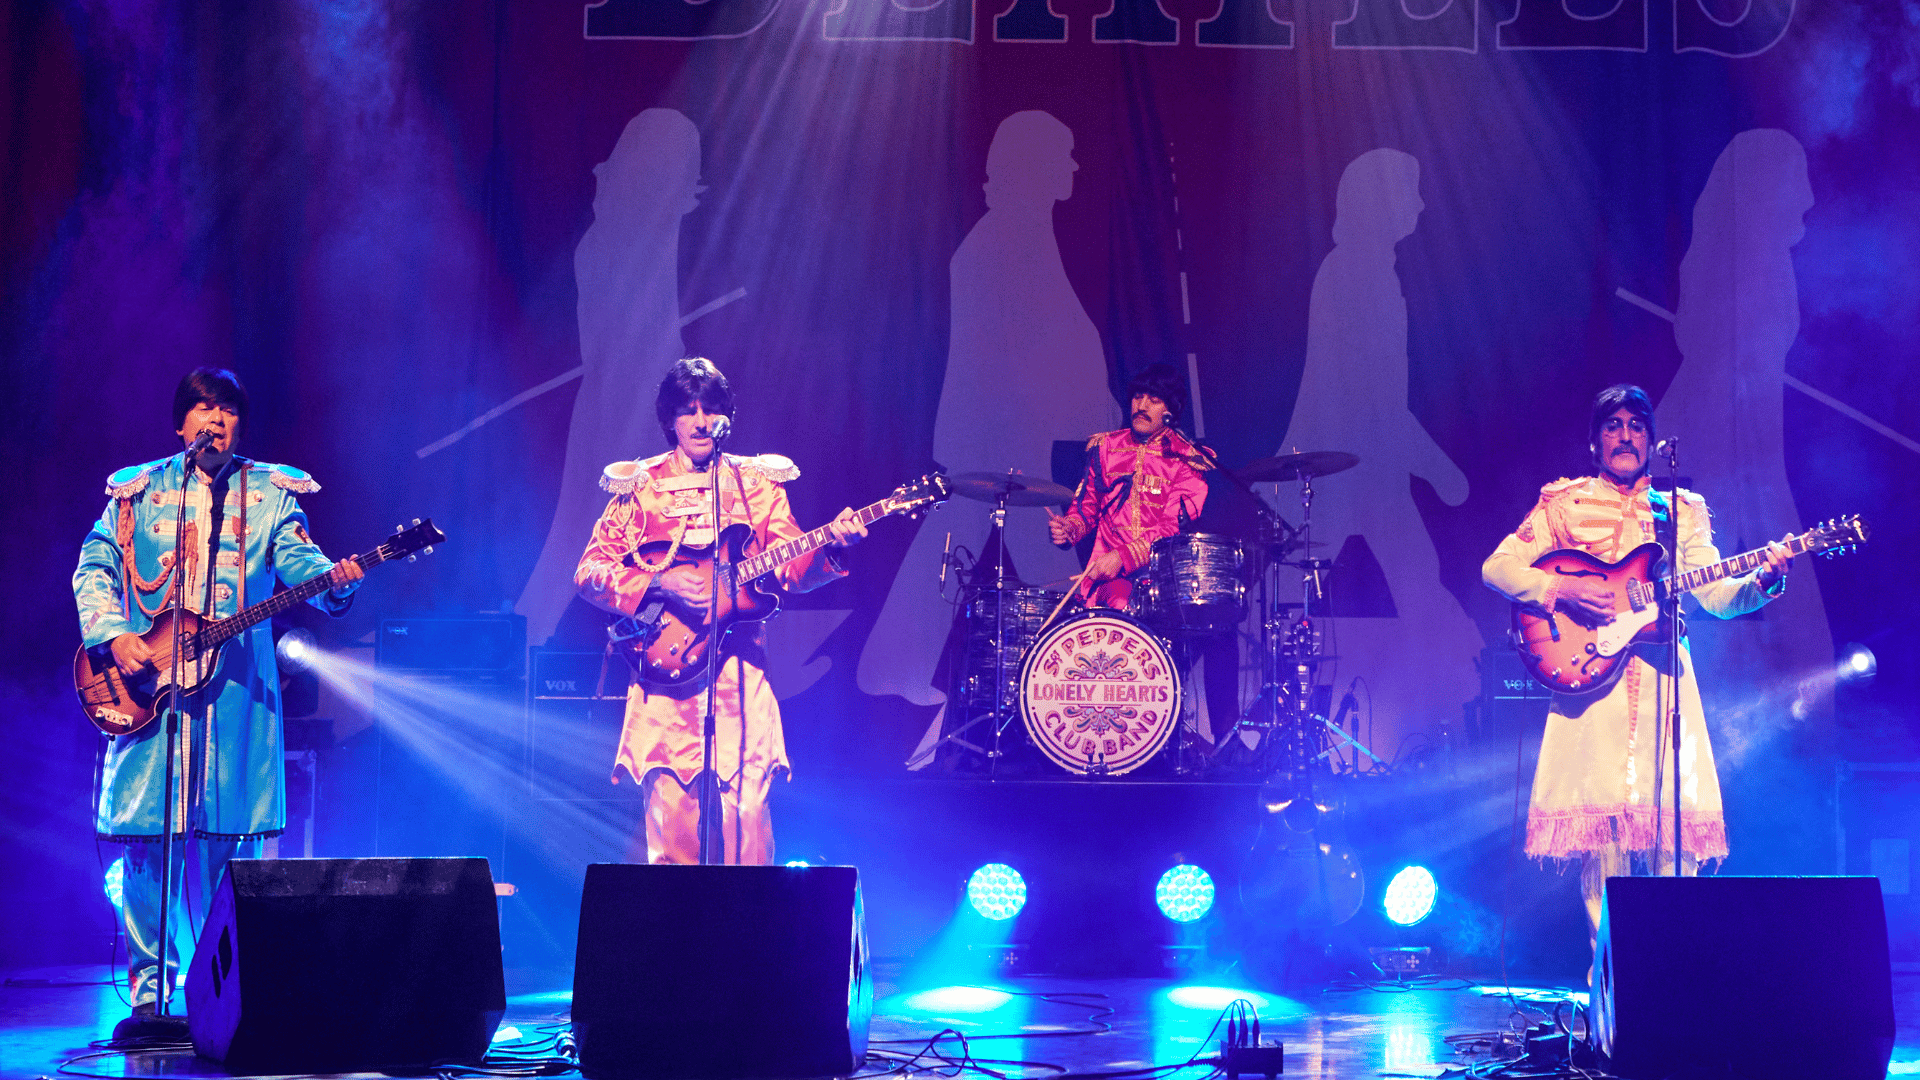 The Magic of the Beatles band stood in a line playing their instruments and singing at a live concert. They are wearing colourful outfits from the Sgt. Pepper album cover. From left to right: Paul, George, Ringo and John.